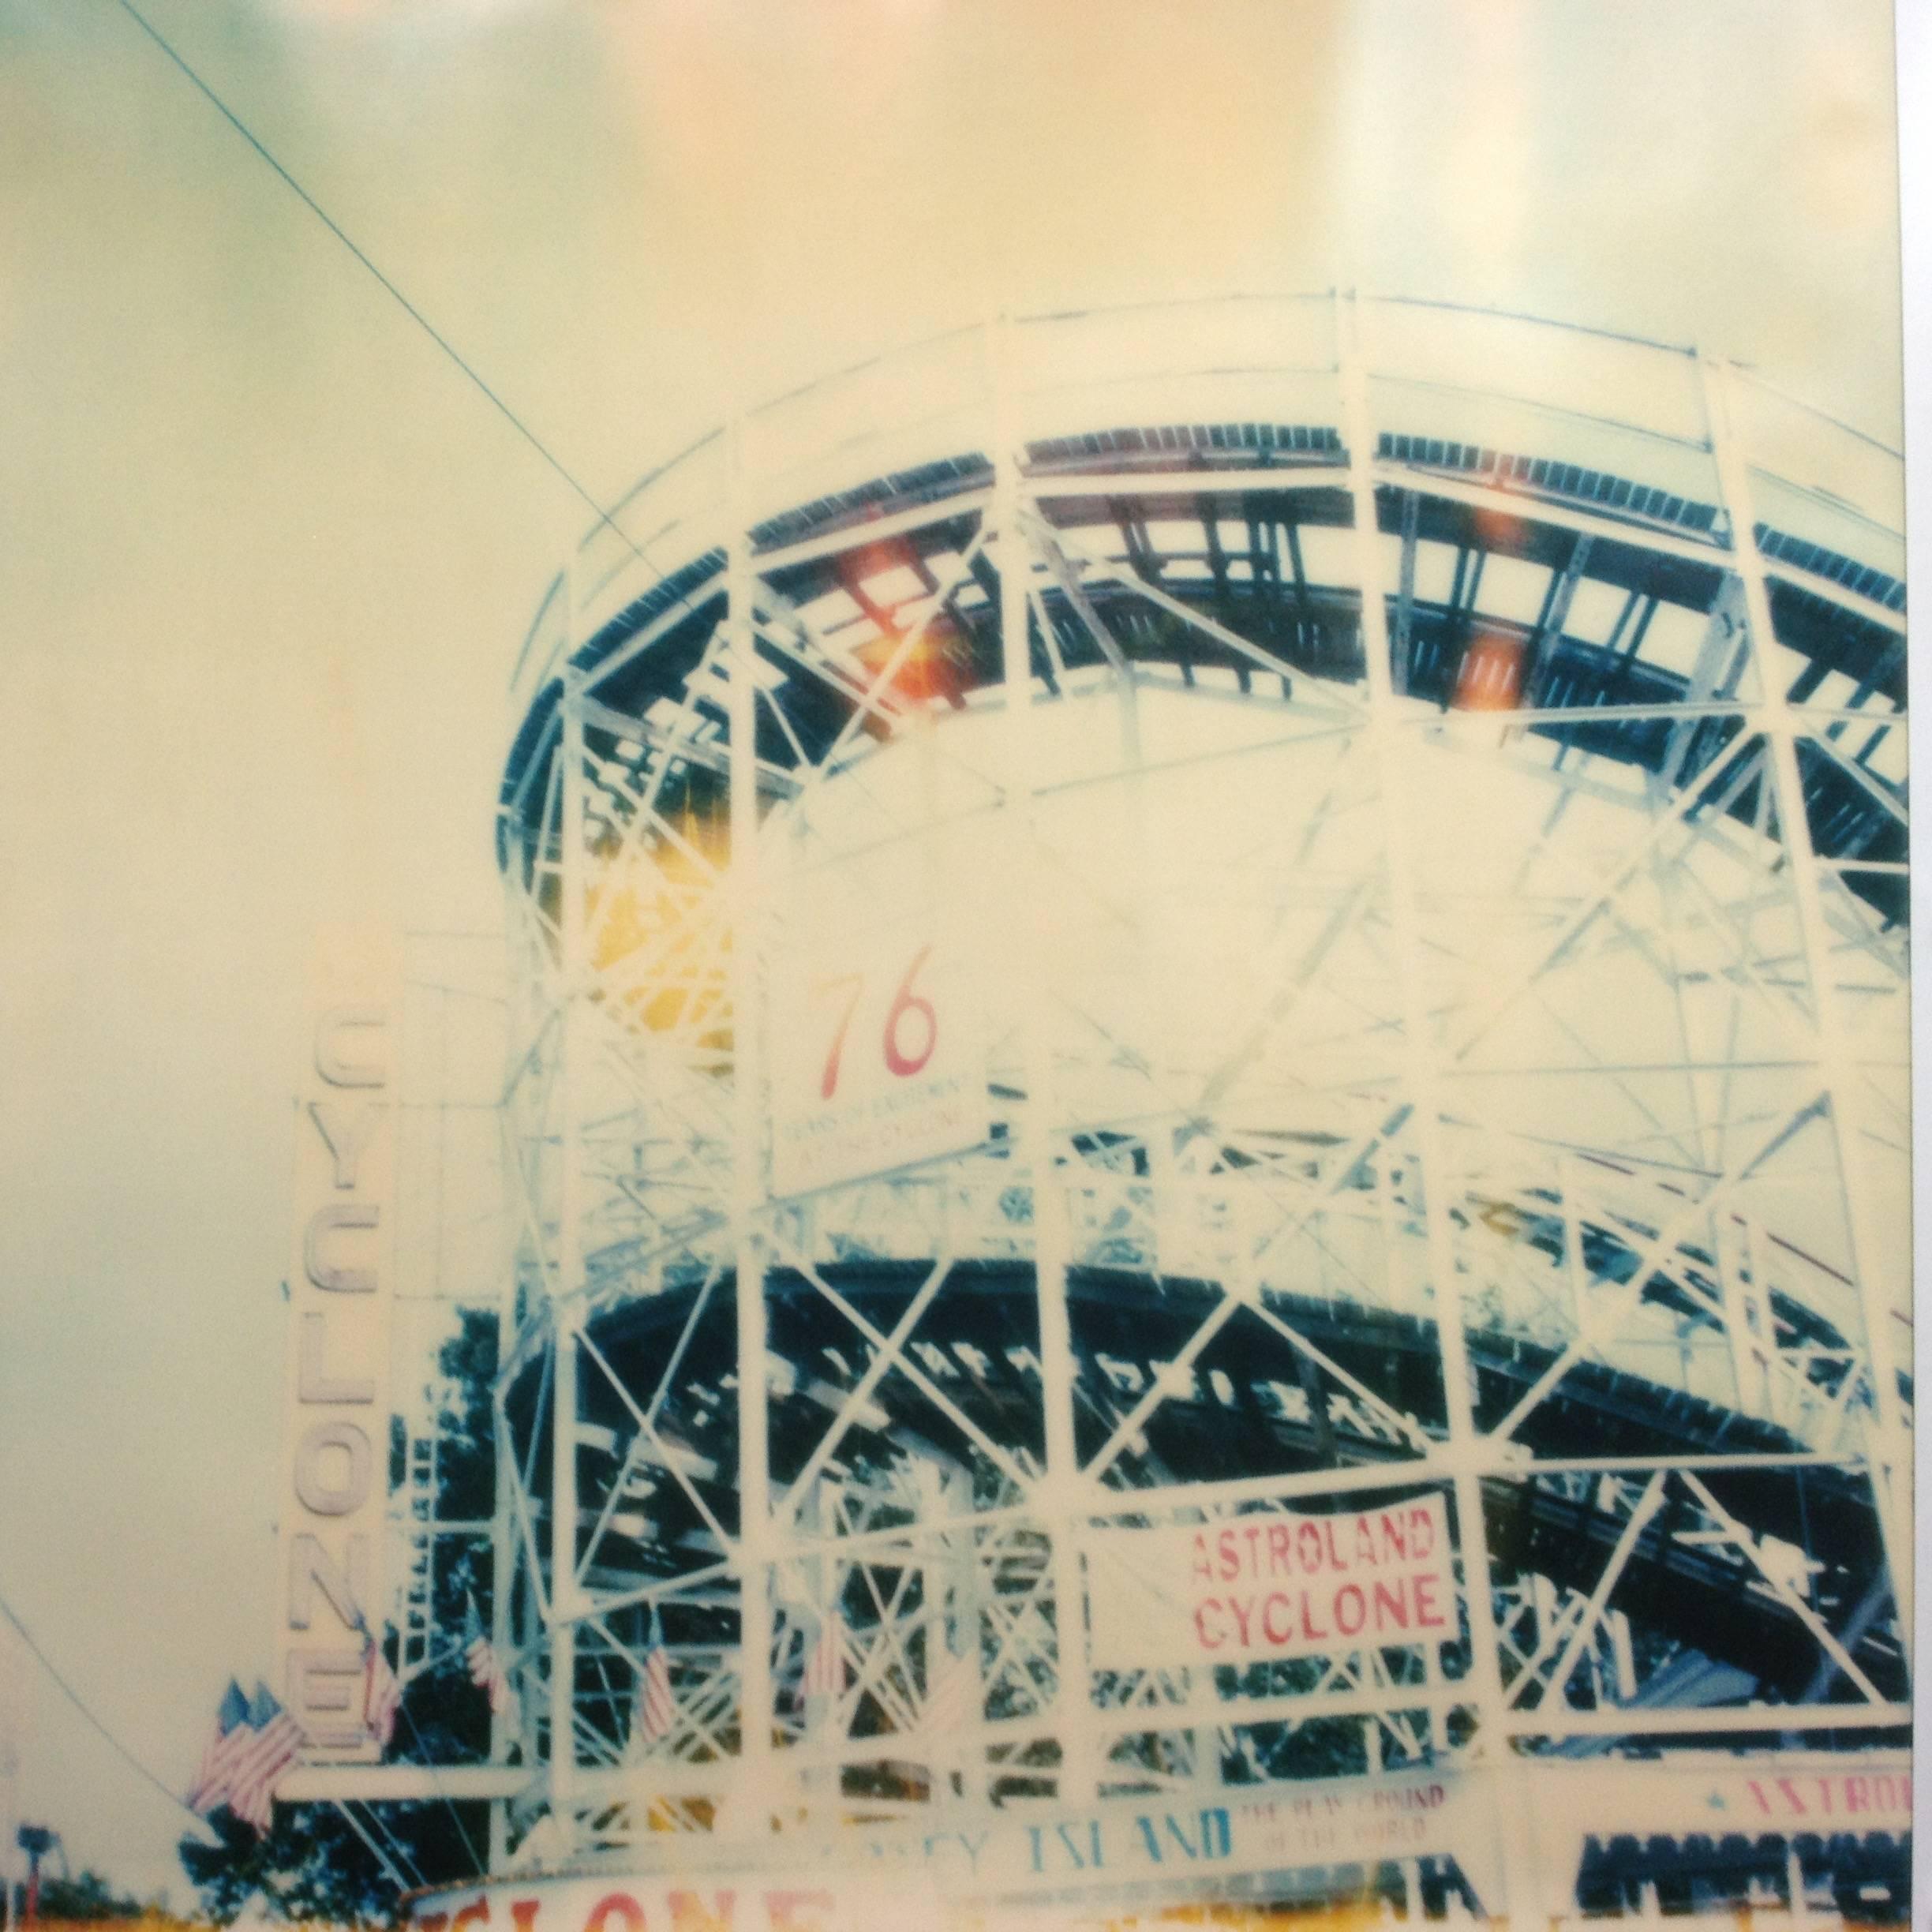 Cyclone from the movie Stay based on a Polaroid - Photograph by Stefanie Schneider